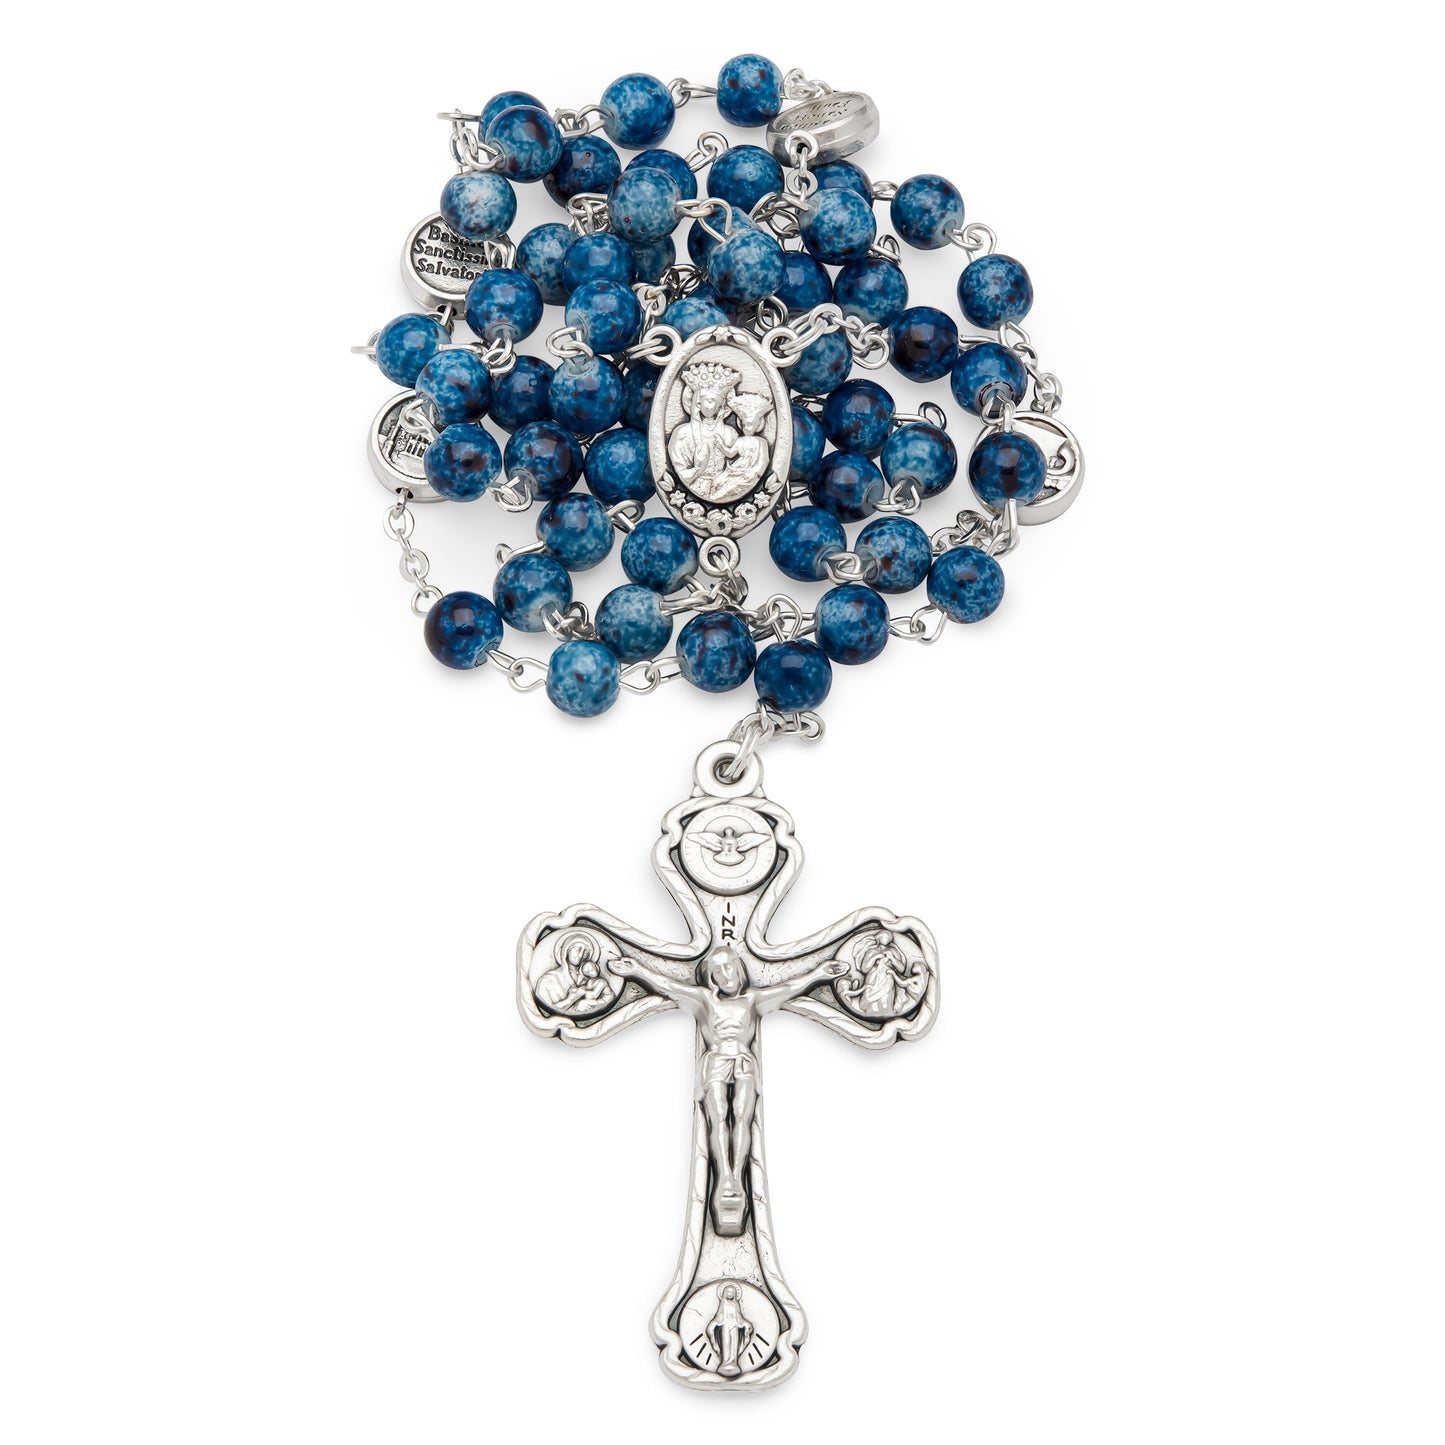 MONDO CATTOLICO Prayer Beads 48 cm (18.9 in) / 6 mm (0.24 in) Blue Variegated Rosary of Our Lady of Good Health